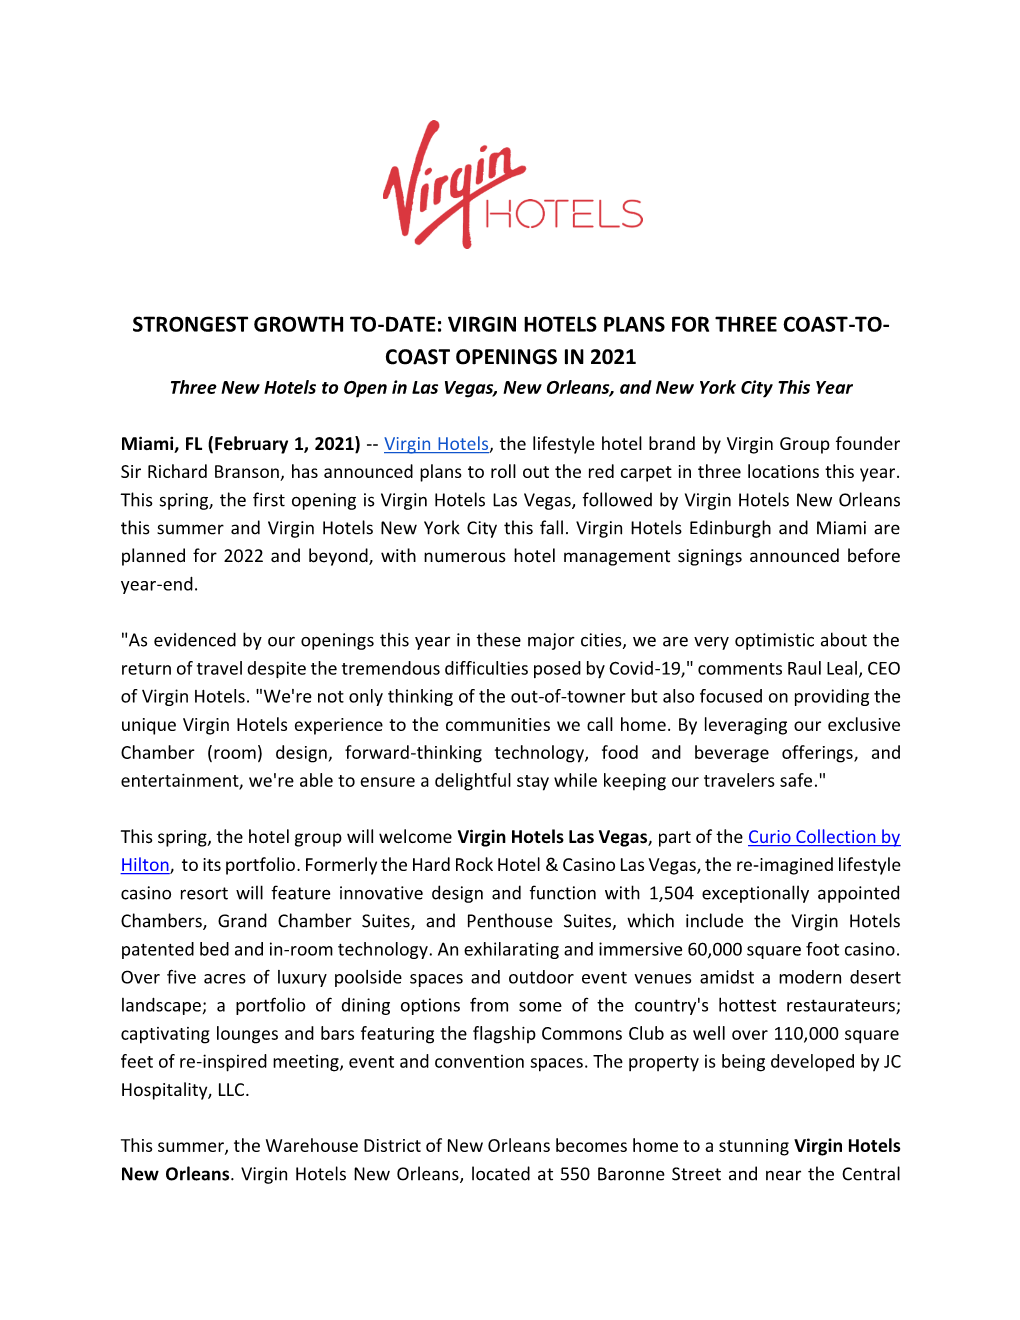 VIRGIN HOTELS PLANS for THREE COAST-TO- COAST OPENINGS in 2021 Three New Hotels to Open in Las Vegas, New Orleans, and New York City This Year